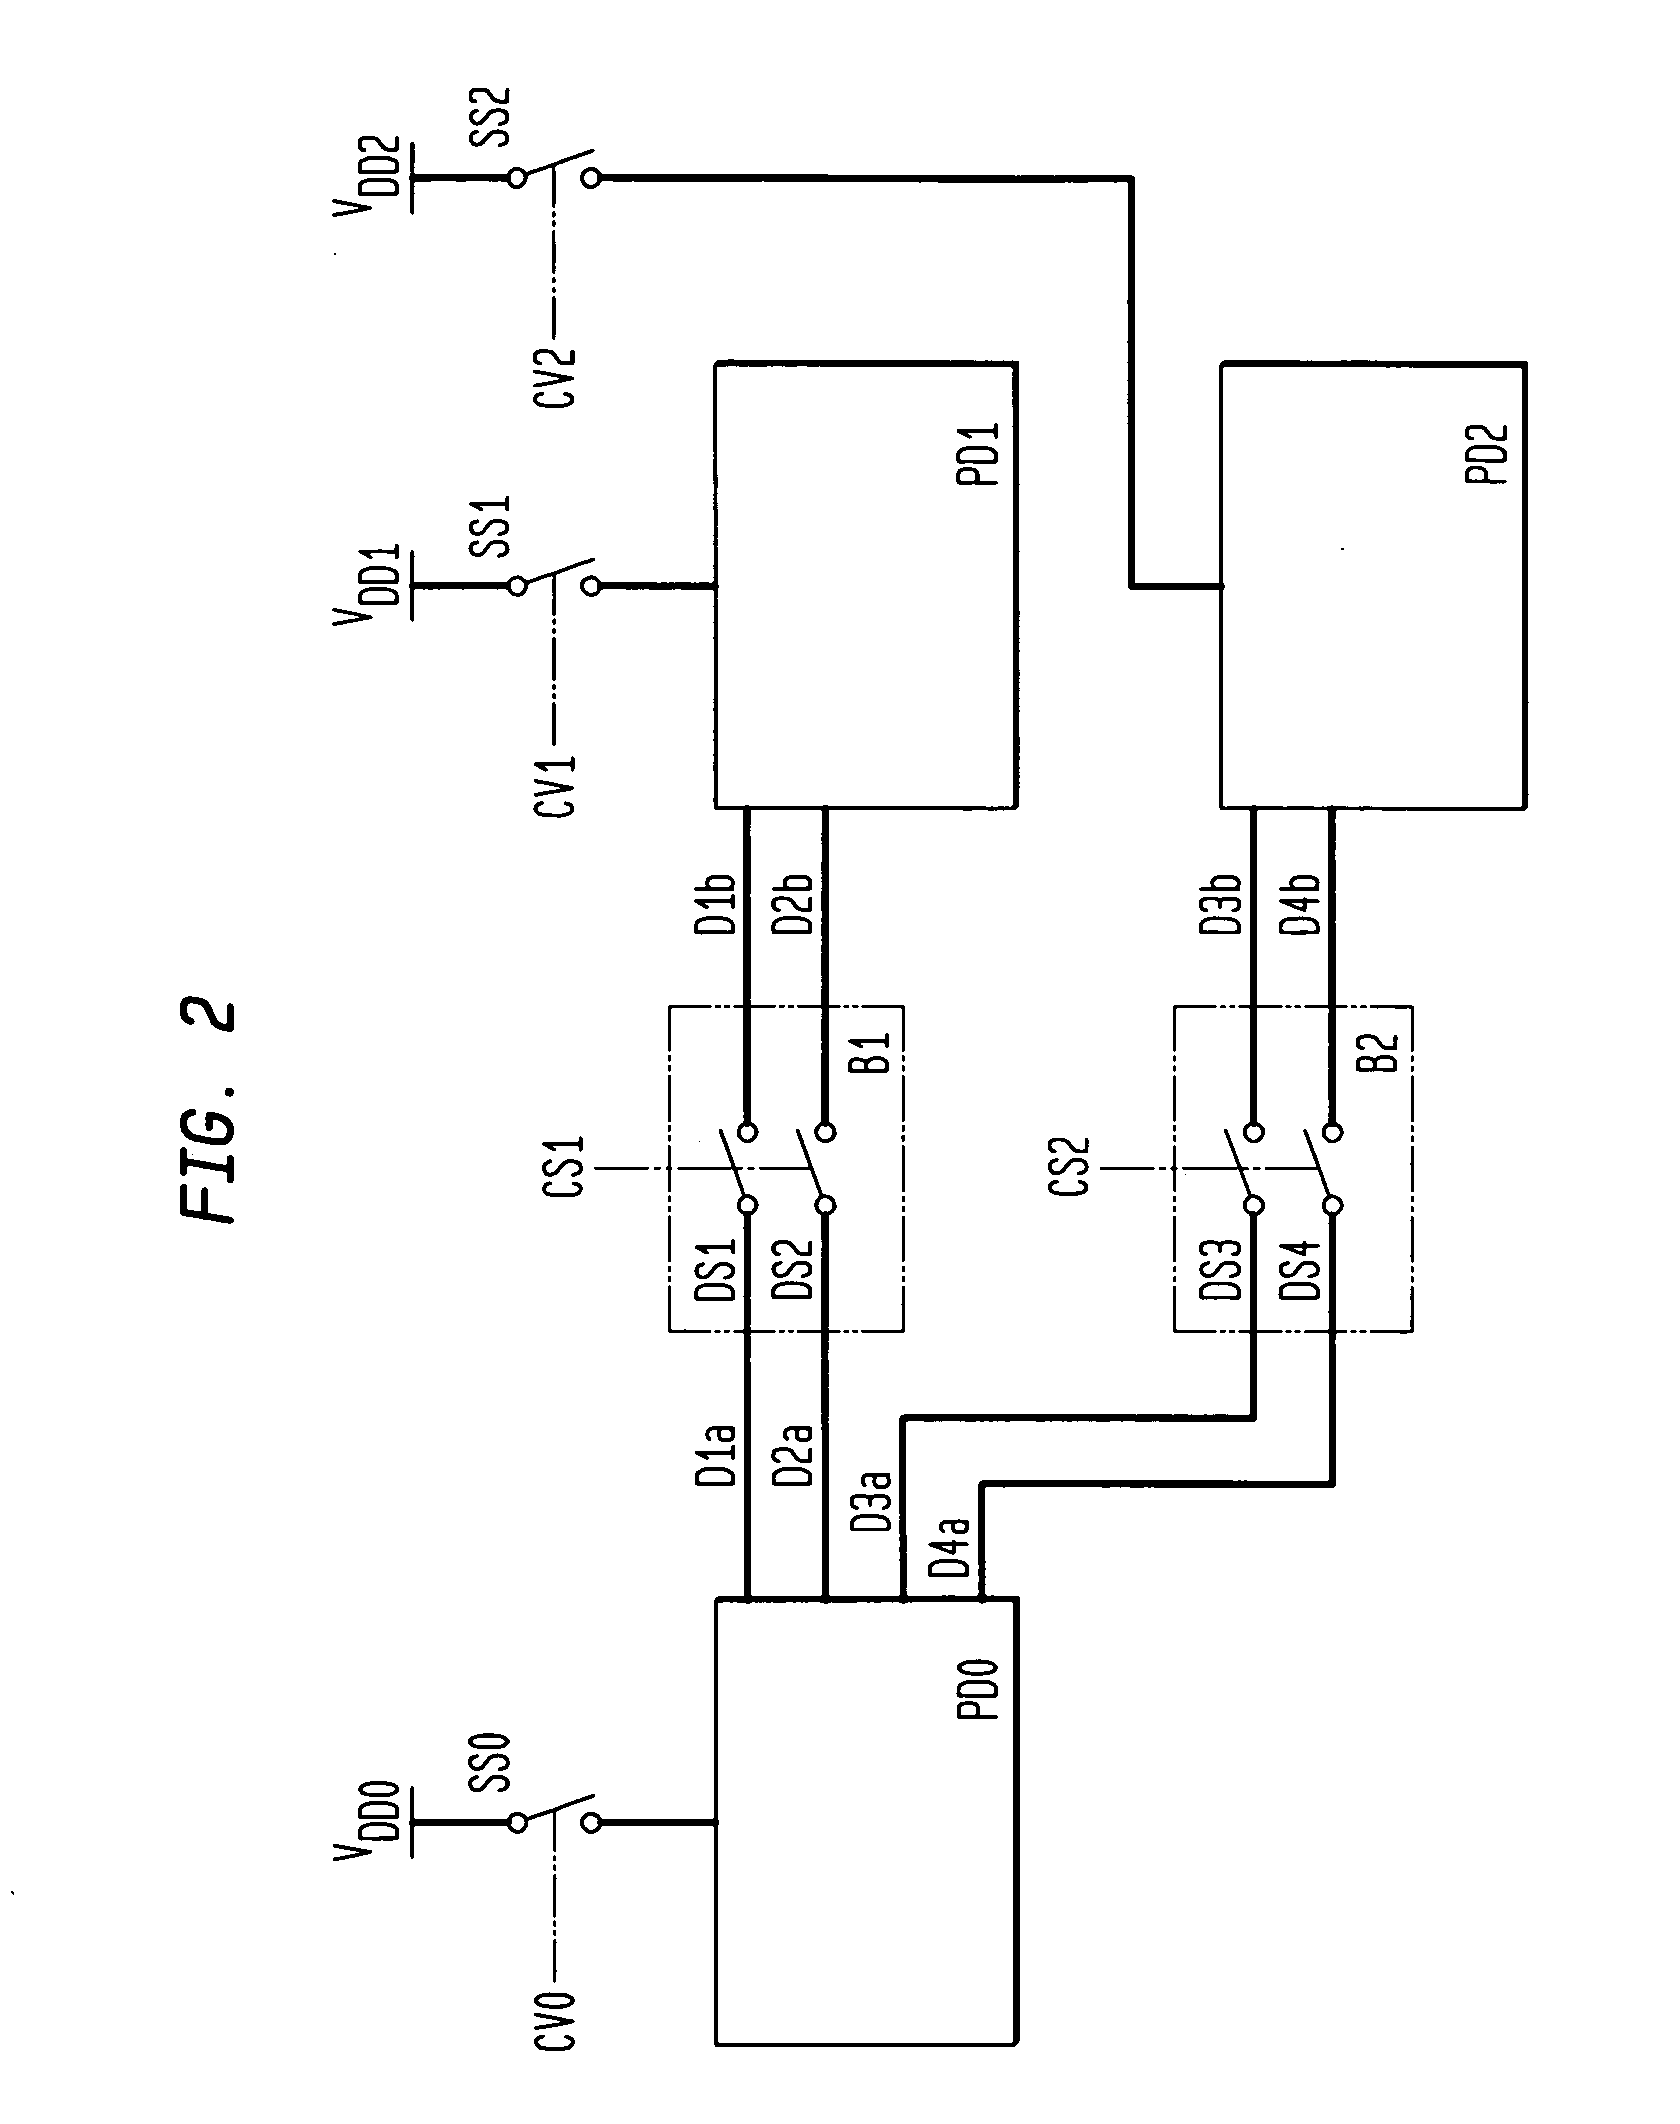 Integrated circuit with multiple power domains